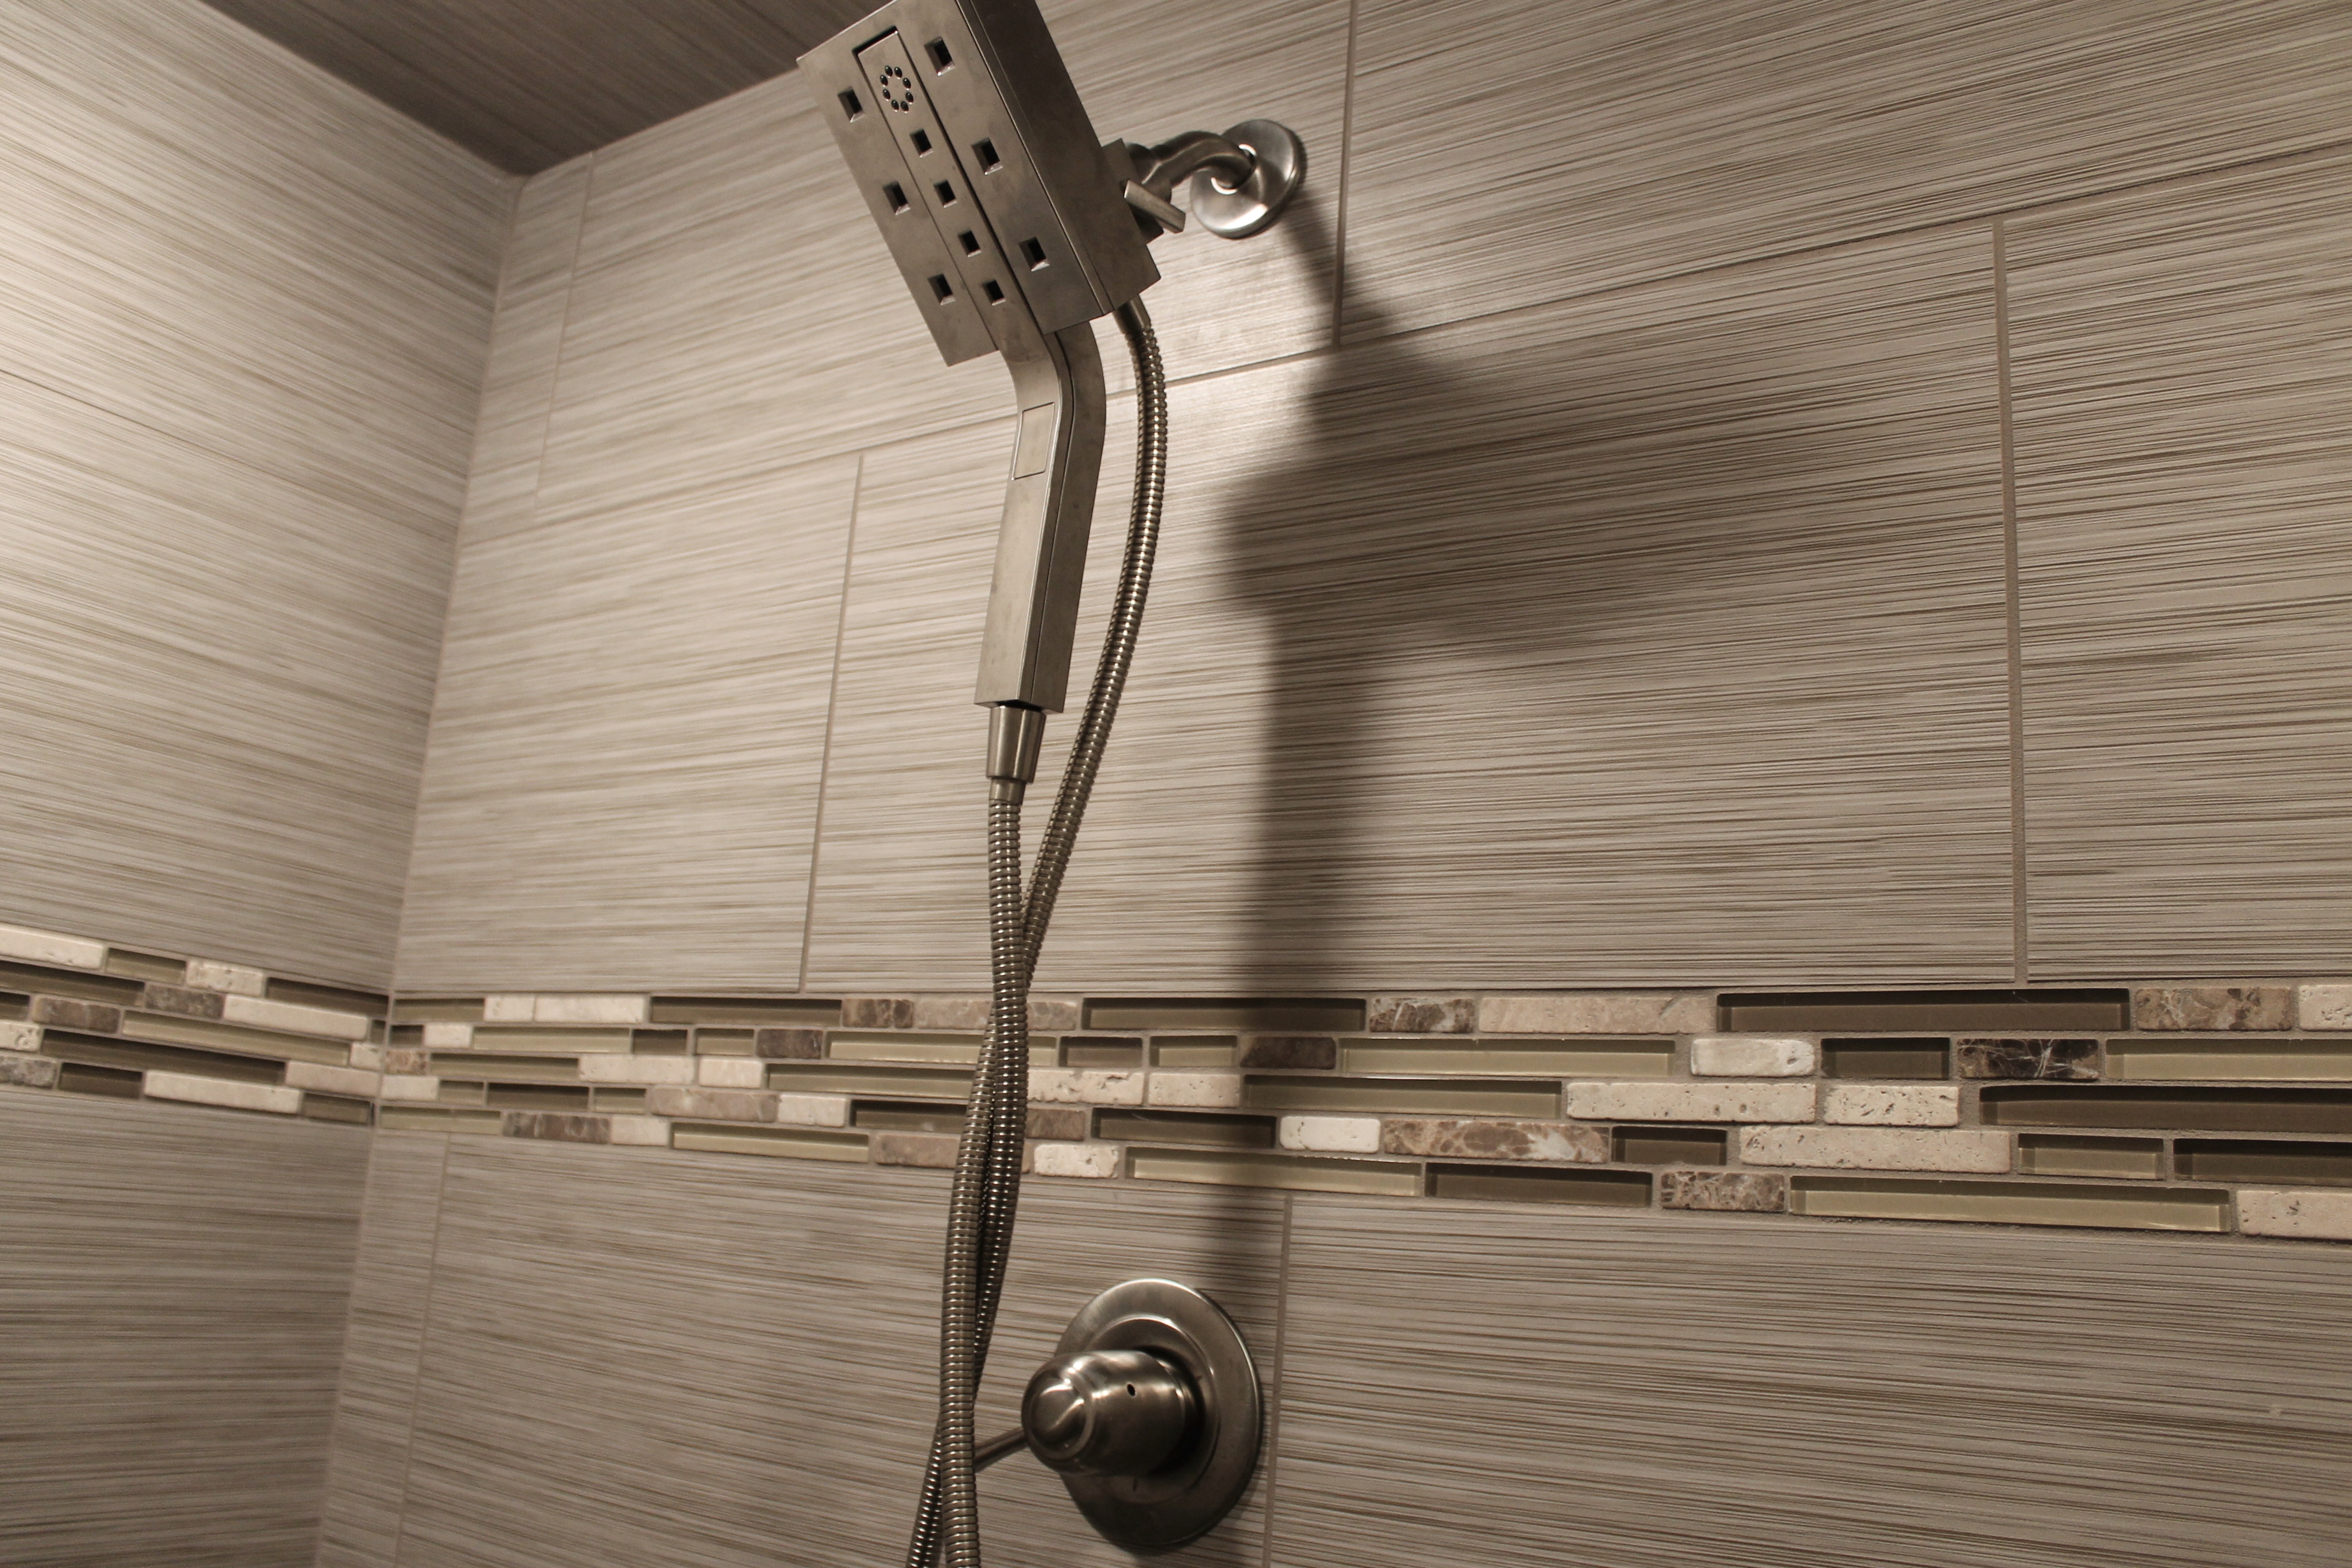 What S Hot In Tile Showers Right Now, Linen Tile Bathroom